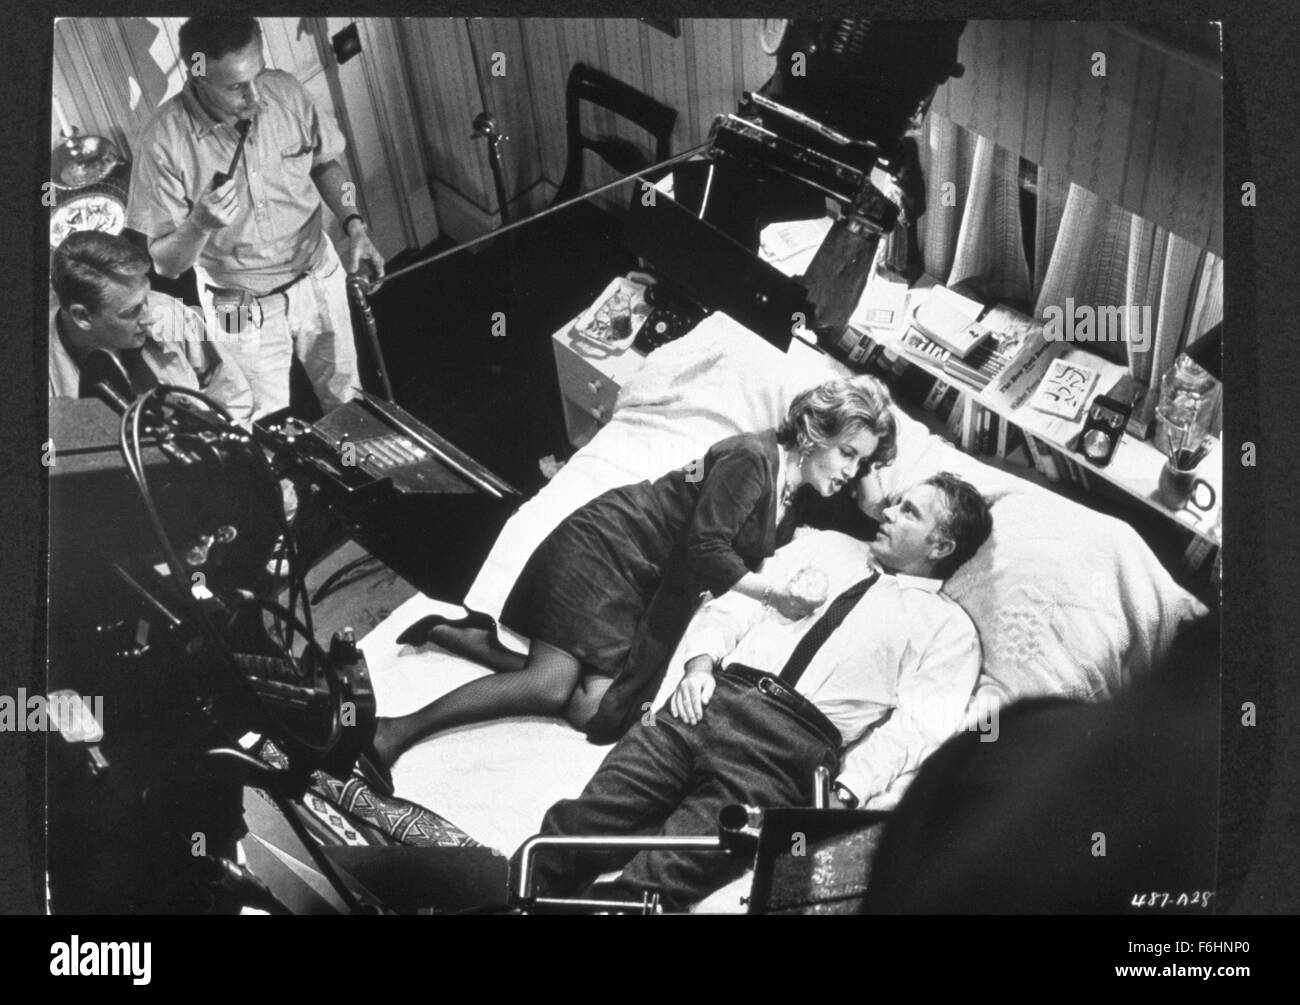 1966, Film Title: WHO'S AFRAID OF VIRGINIA WOOLF?, Director: MIKE NICHOLS, Pictured: BEHIND THE SCENES, RICHARD BURTON, DIRECTOR DIRECTS, MIKE NICHOLS, ELIZABETH TAYLOR, BEHIND SCENES, FILMING, BED. (Credit Image: SNAP) Stock Photo